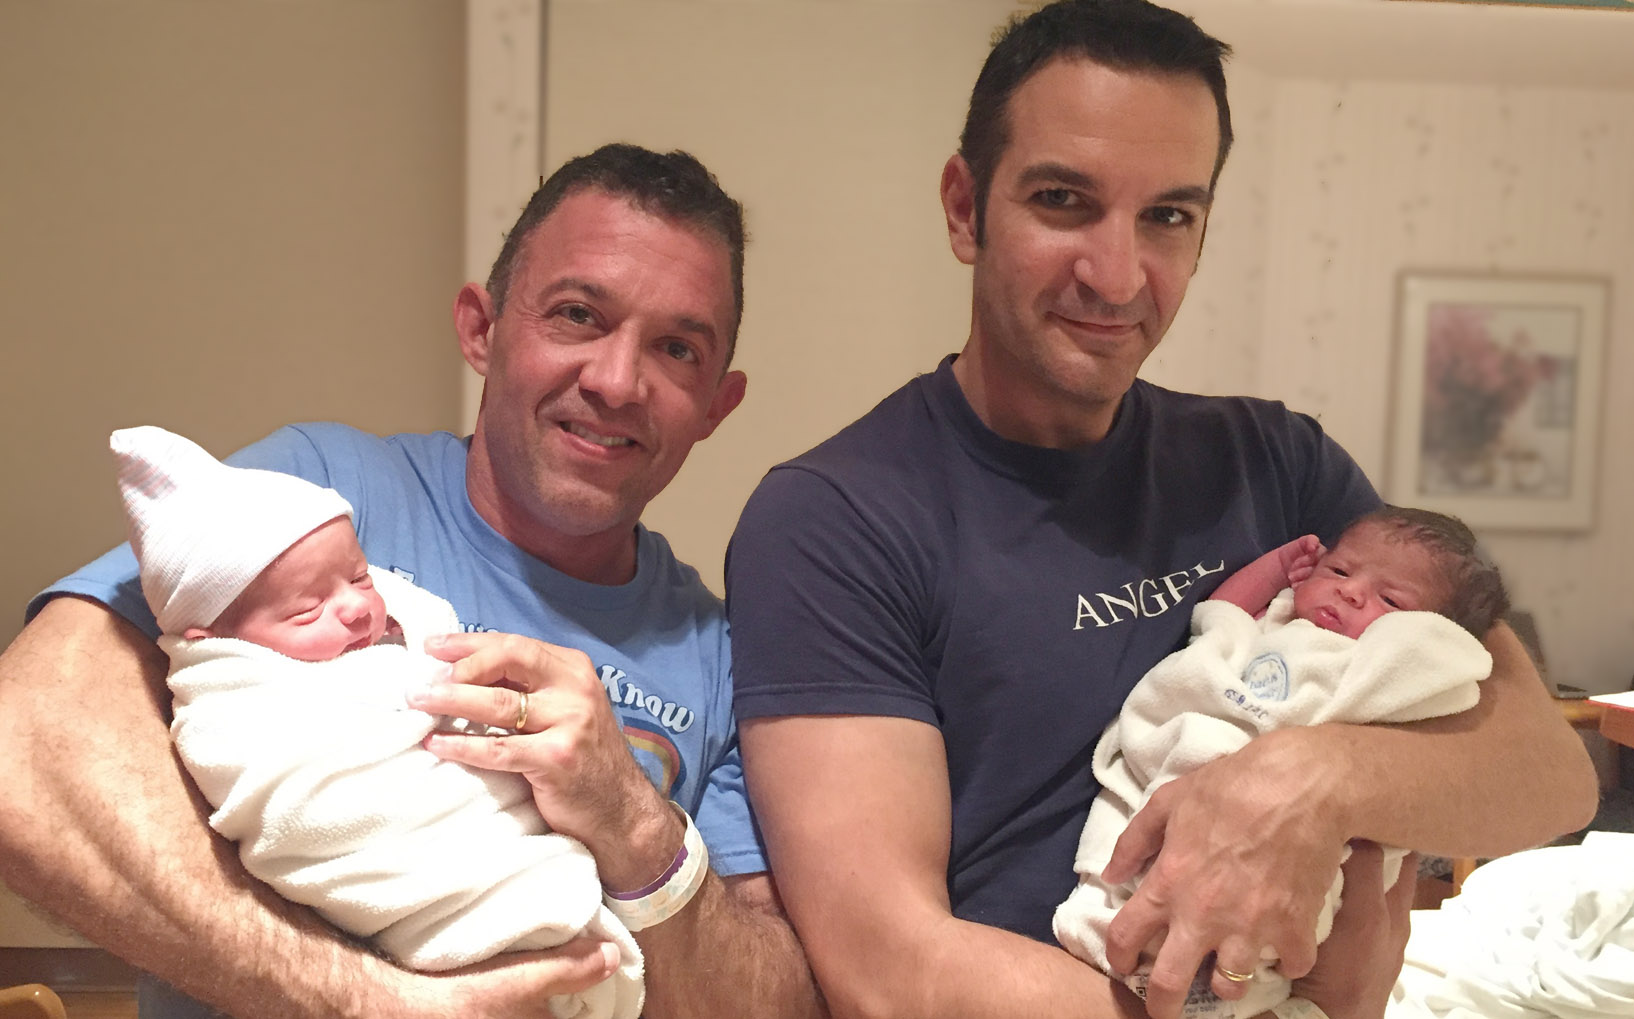 Surrogacy for Gay Men: Grants and Overcoming Financial Obstacles